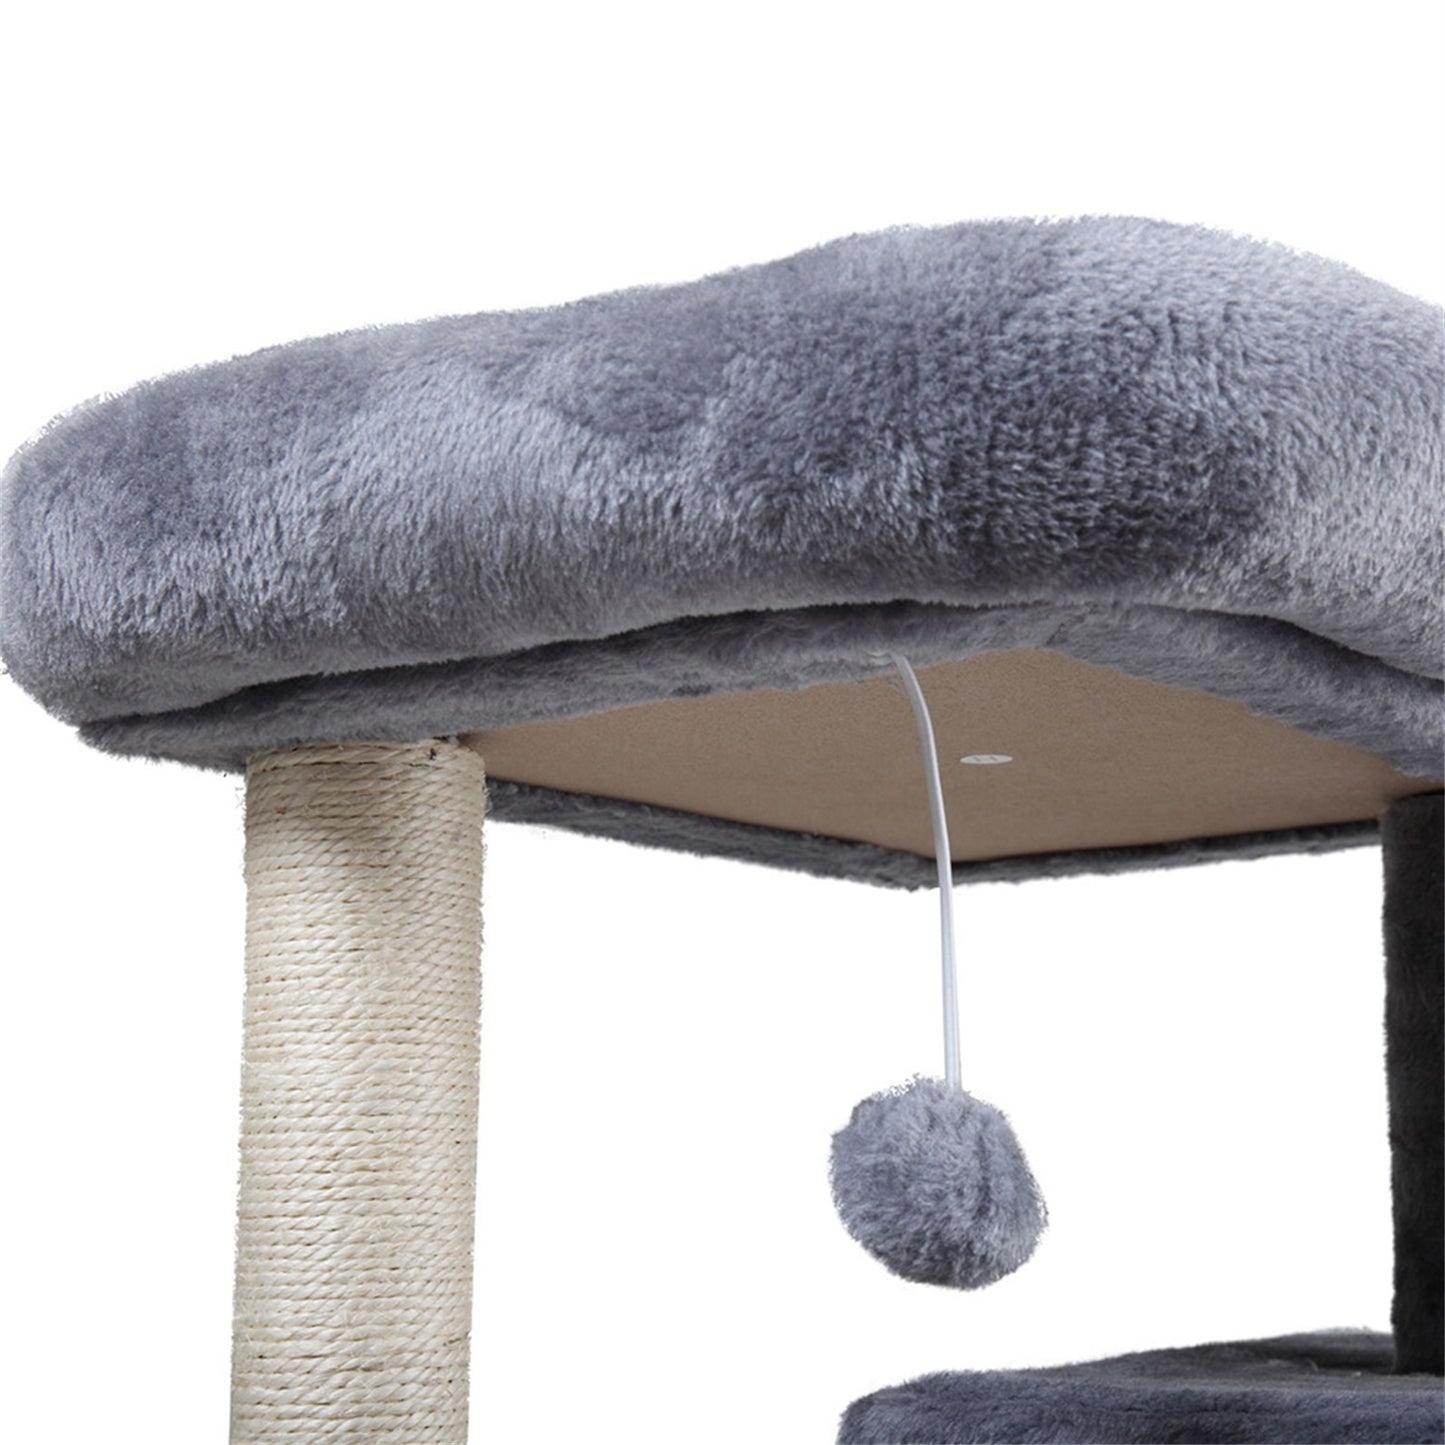 Pefilos Cat Tree Houses for Indoor Cats, Multi-Level Cat Condo for Large Cat Tower Furniture with Sisal-Covered Scratching Posts, Cat Condo for Senior Cats, Gray